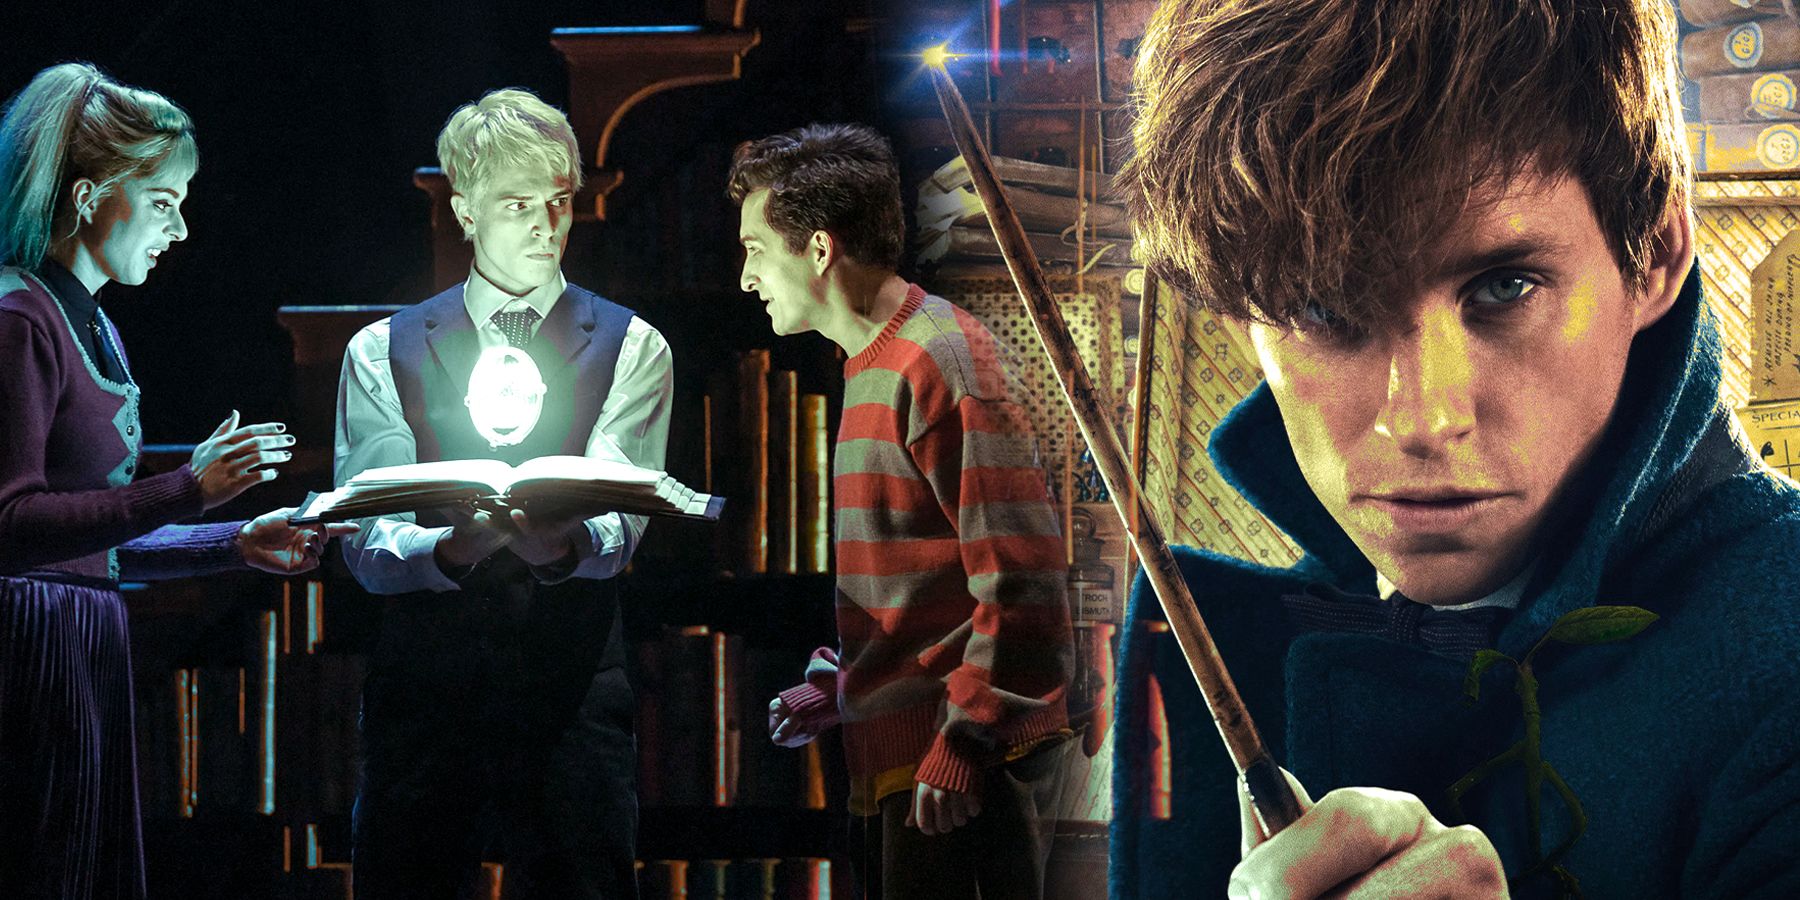 Fantastic Beasts vs. Cursed Child Which Harry Potter Follow-up Is Better